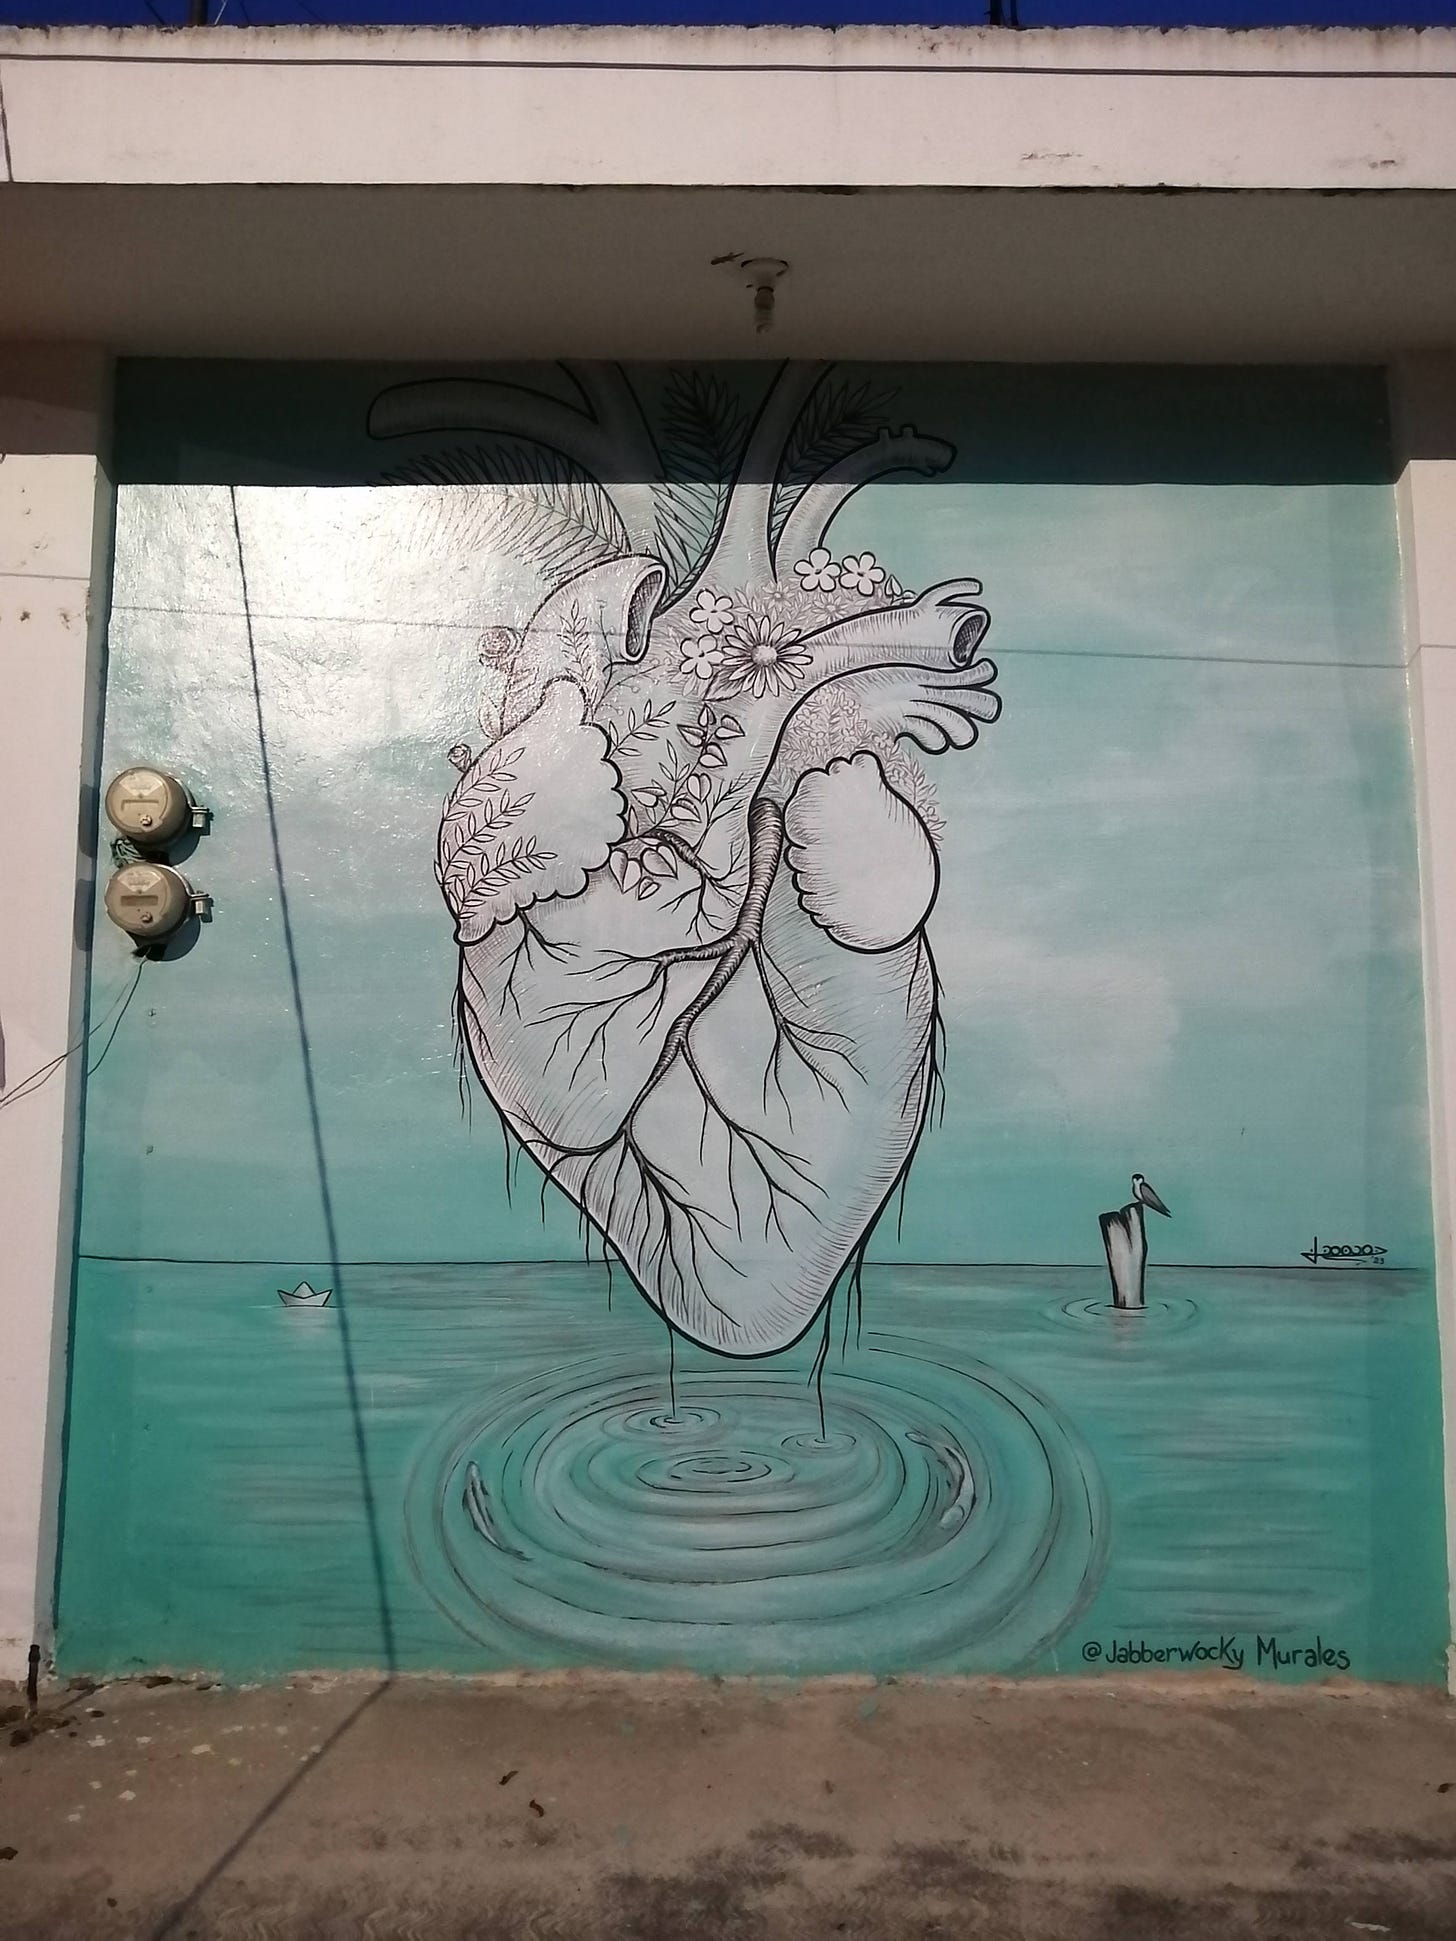 Graffiti of a human heart with leaves and flowers blooming from it. It is hanging over a lake, water dripping into it.